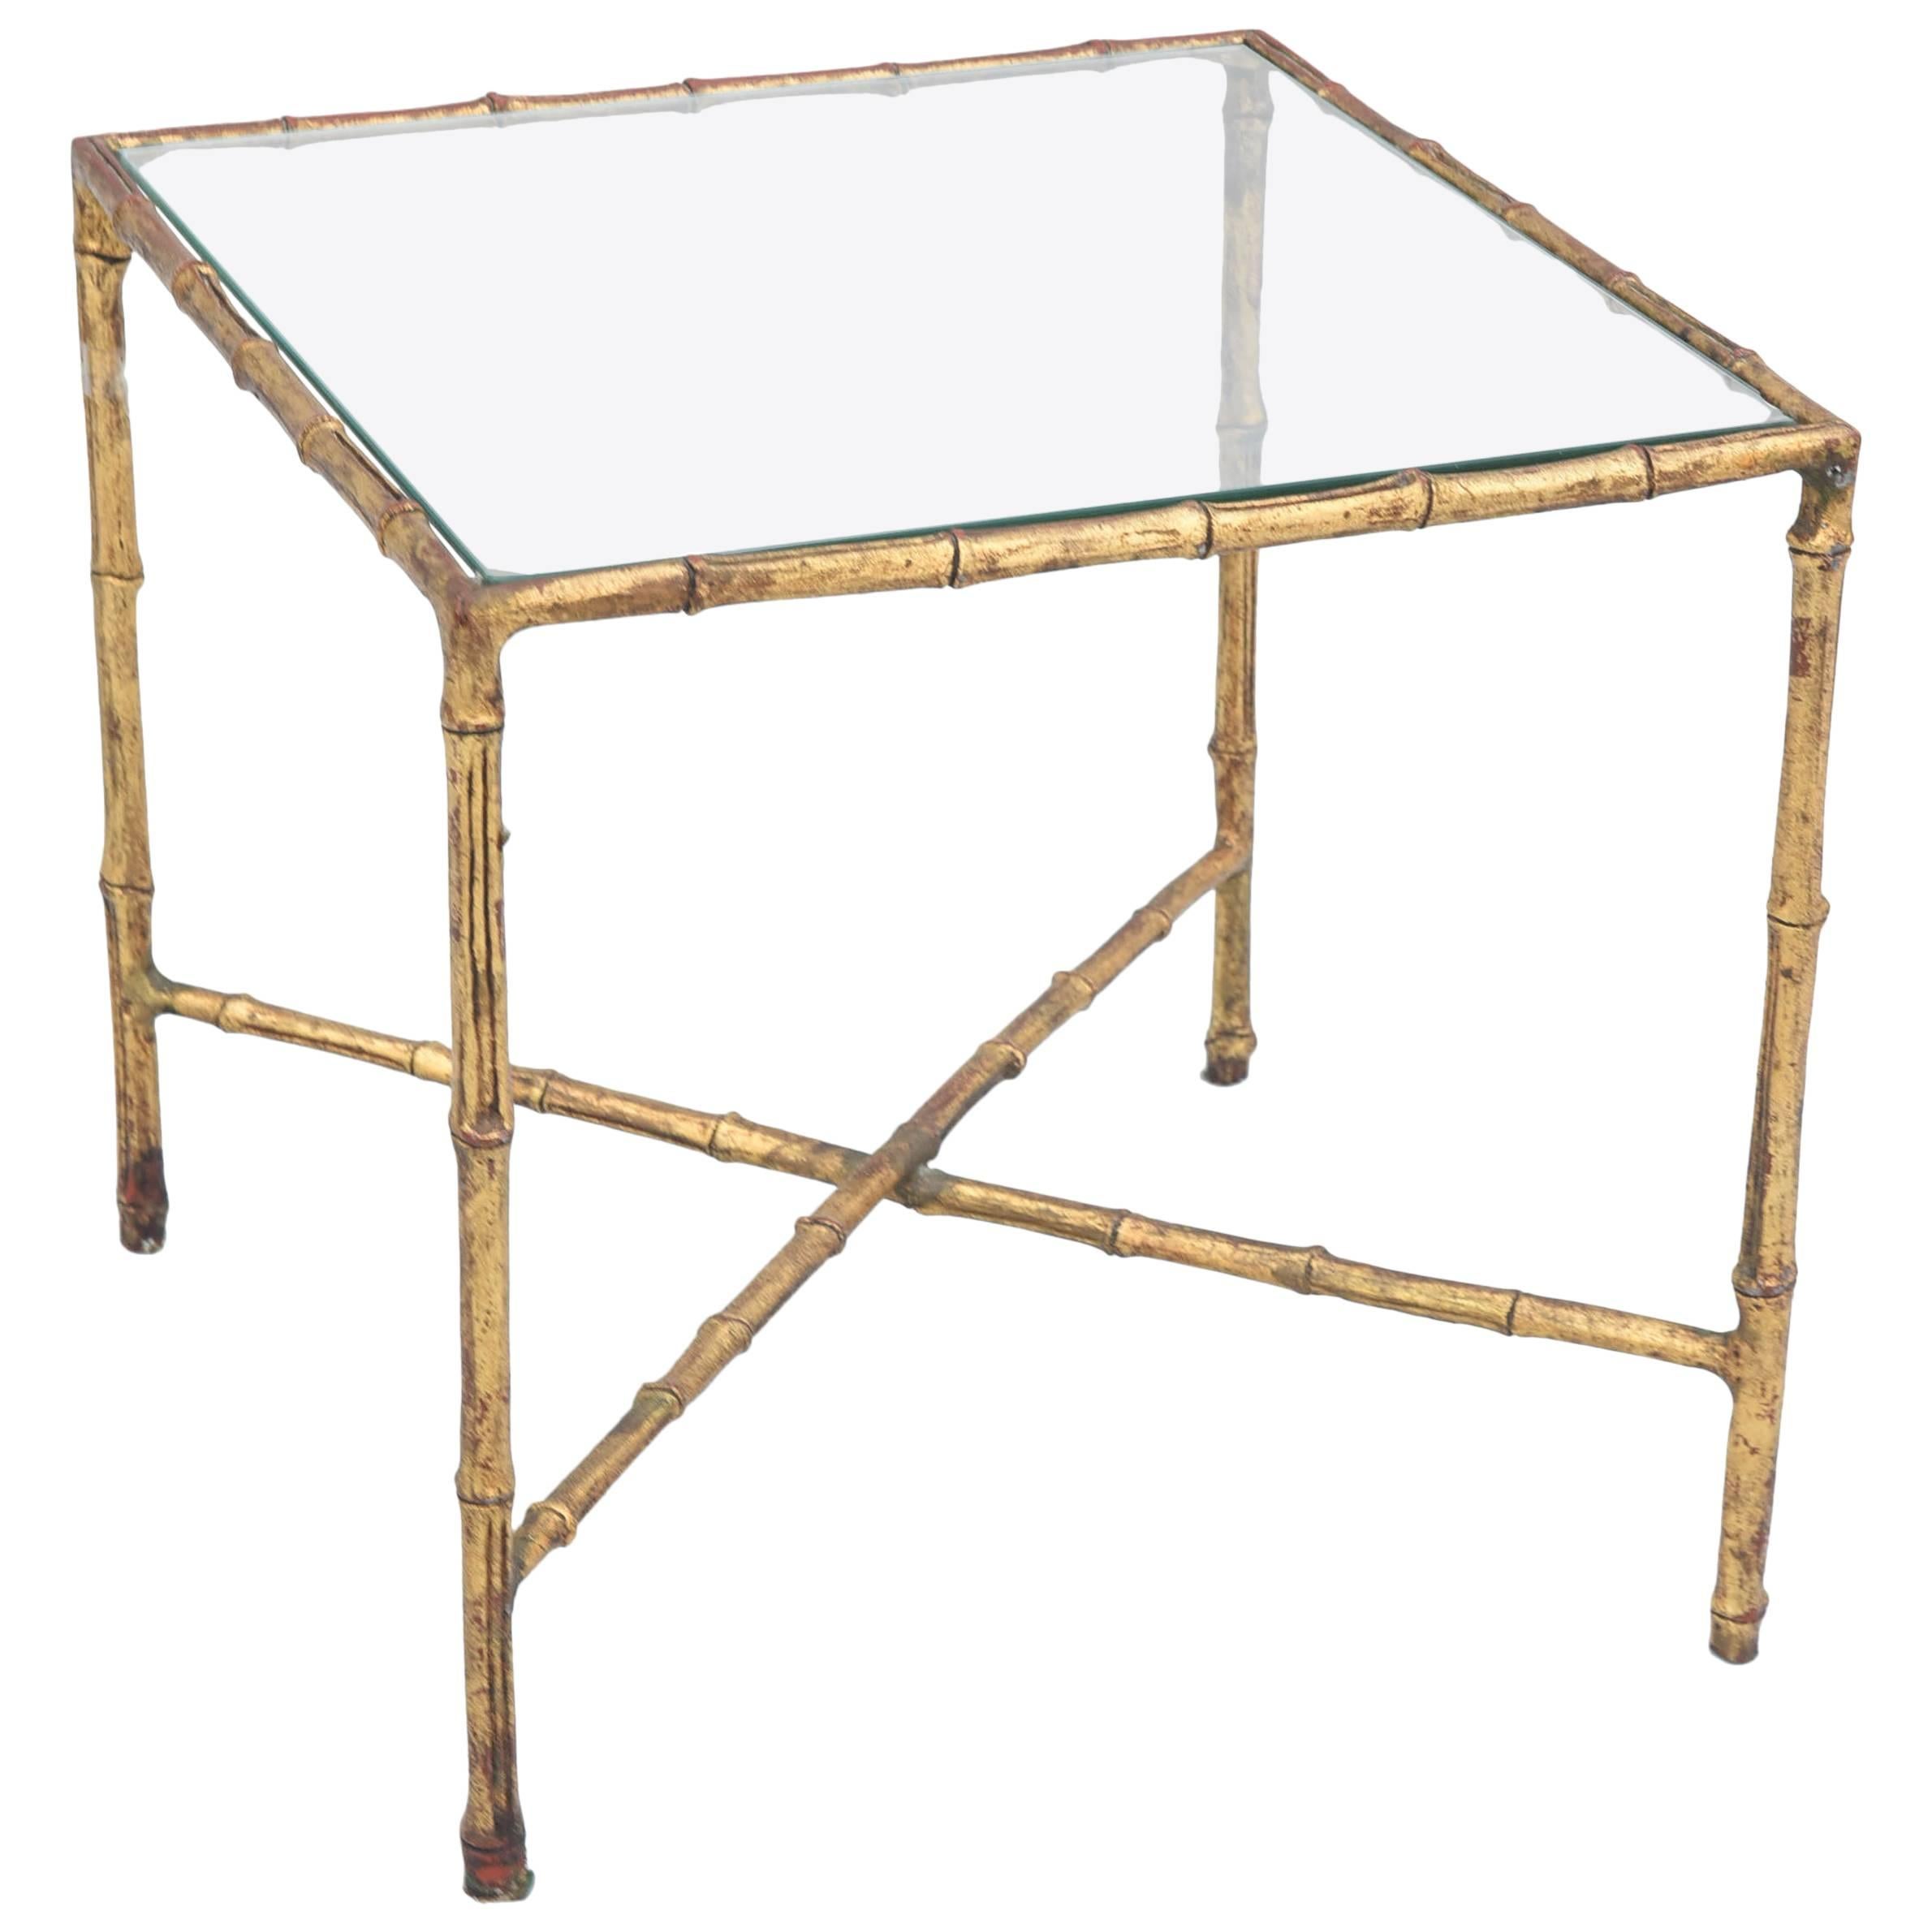 Gilded Iron Faux Bamboo Accent Table